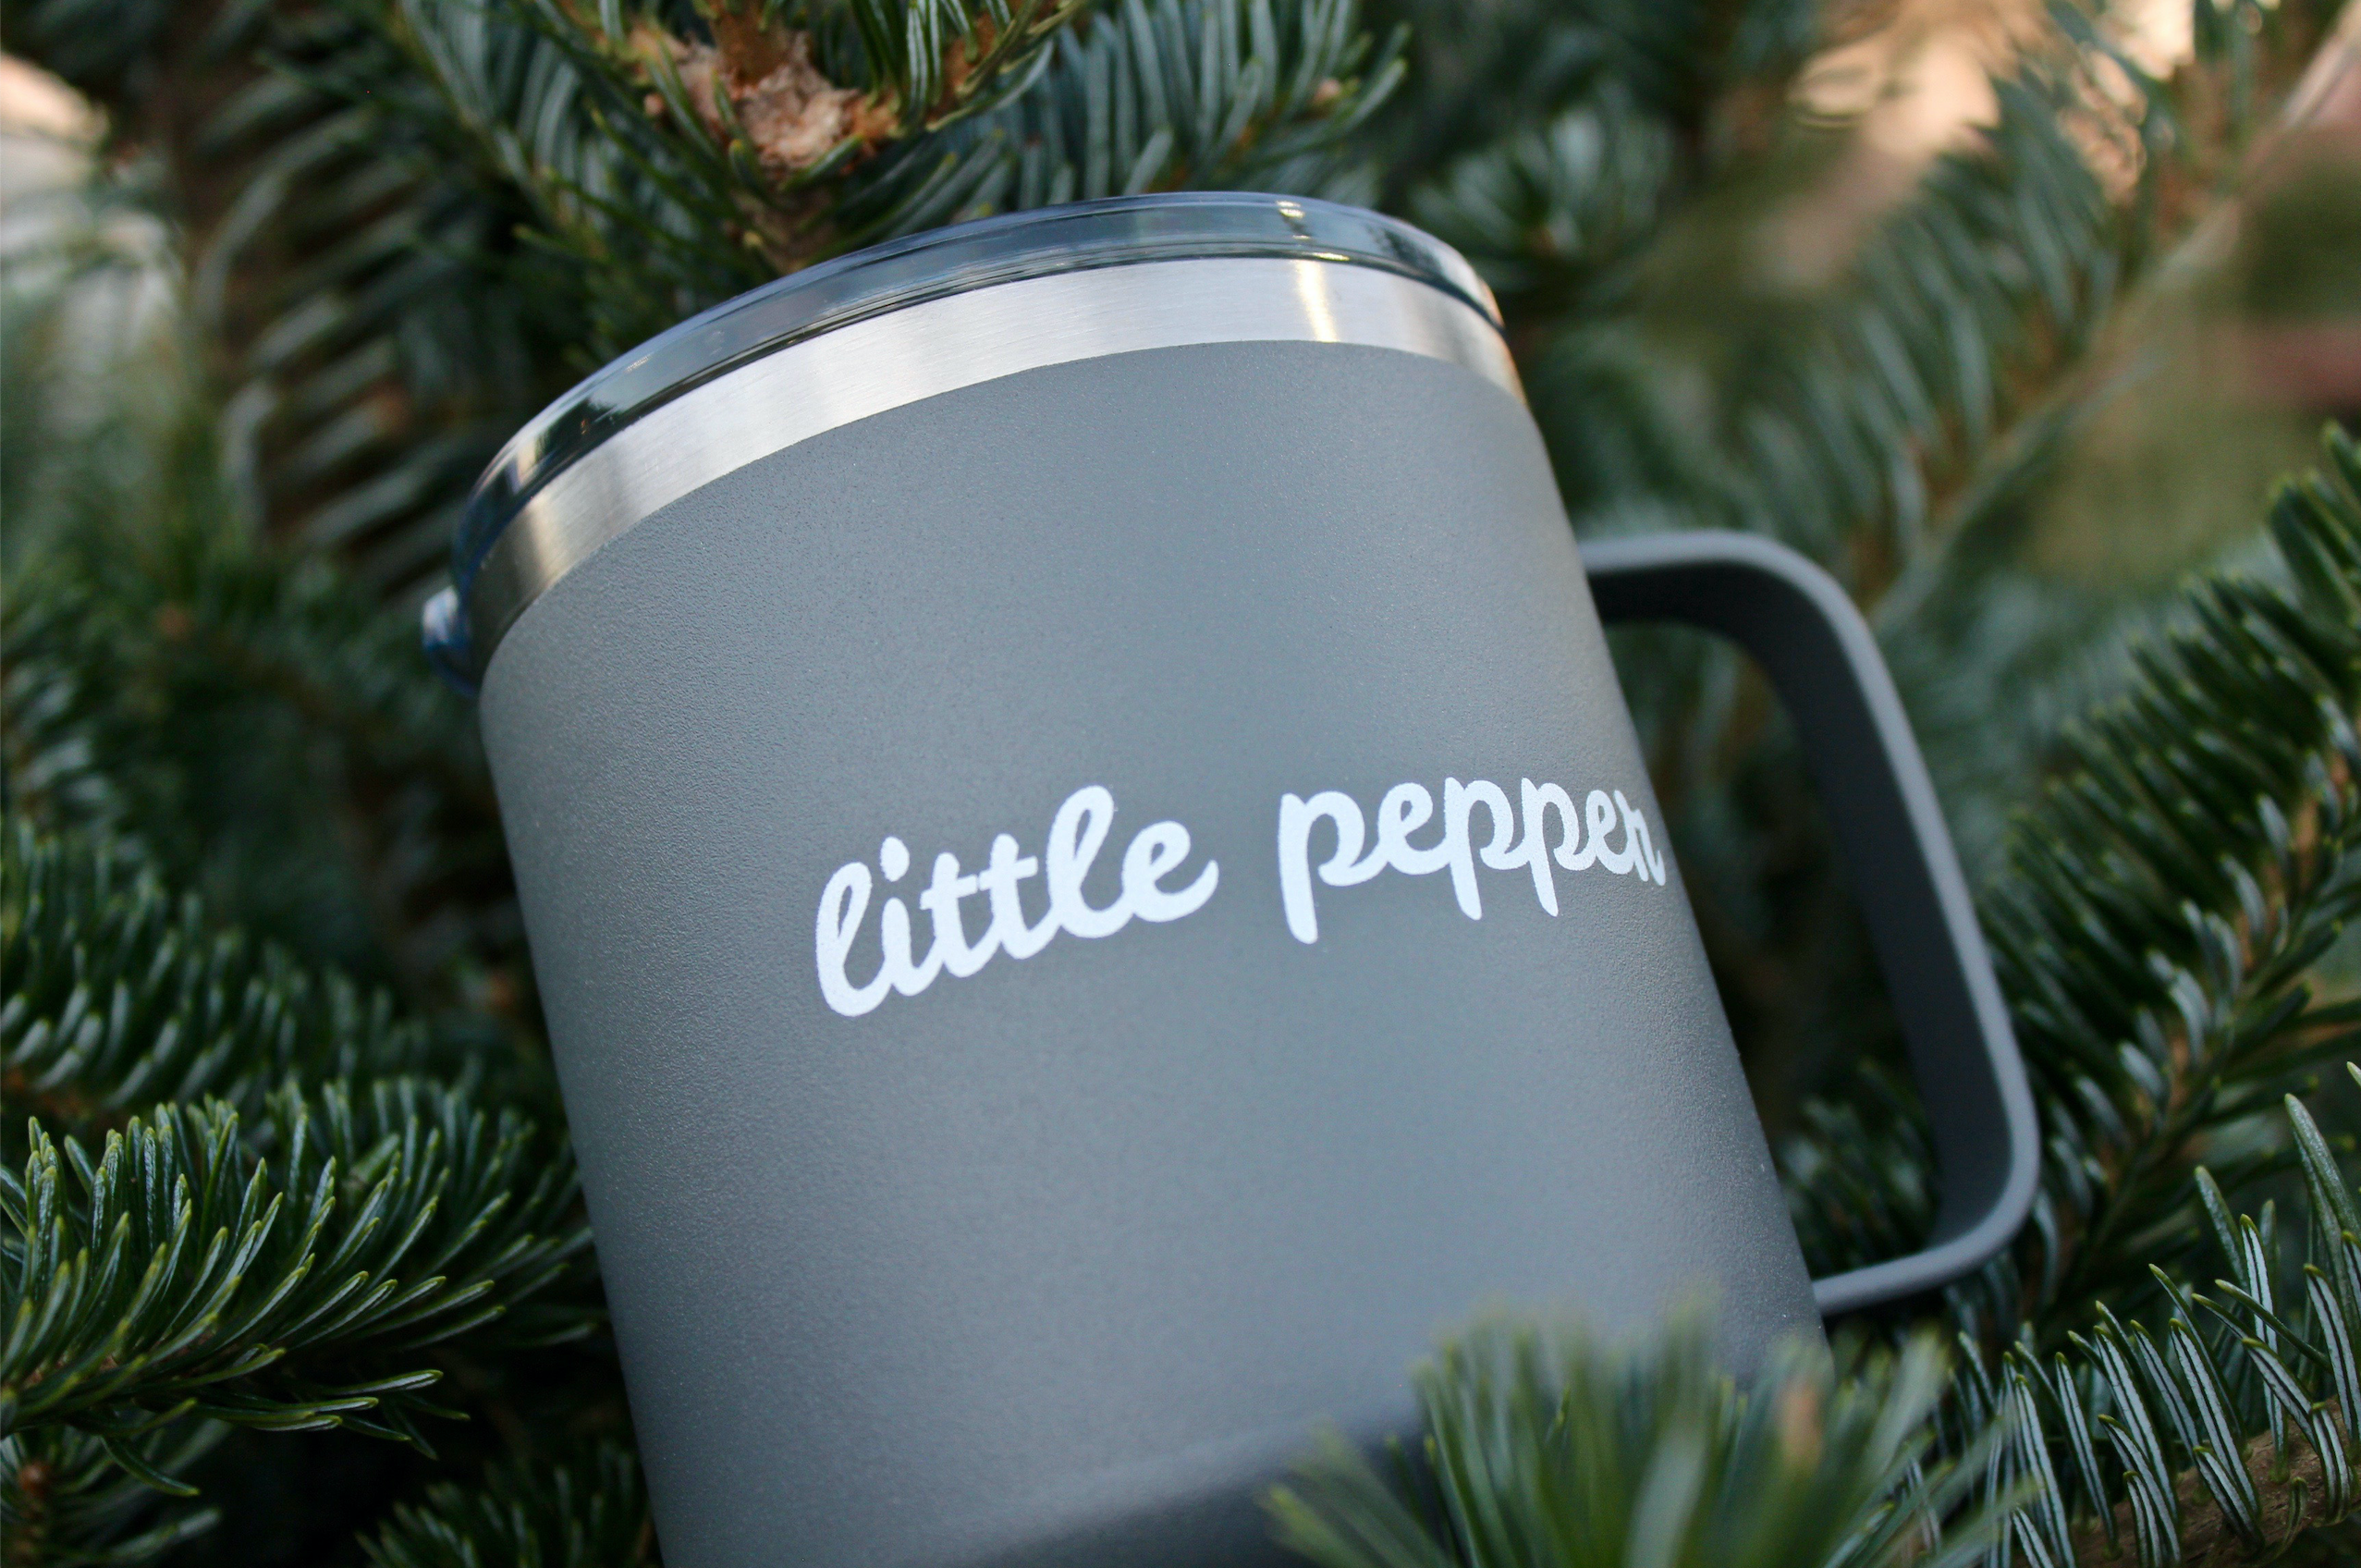 little pepper promotions does drinkware, apparel, totes, and client gifts!